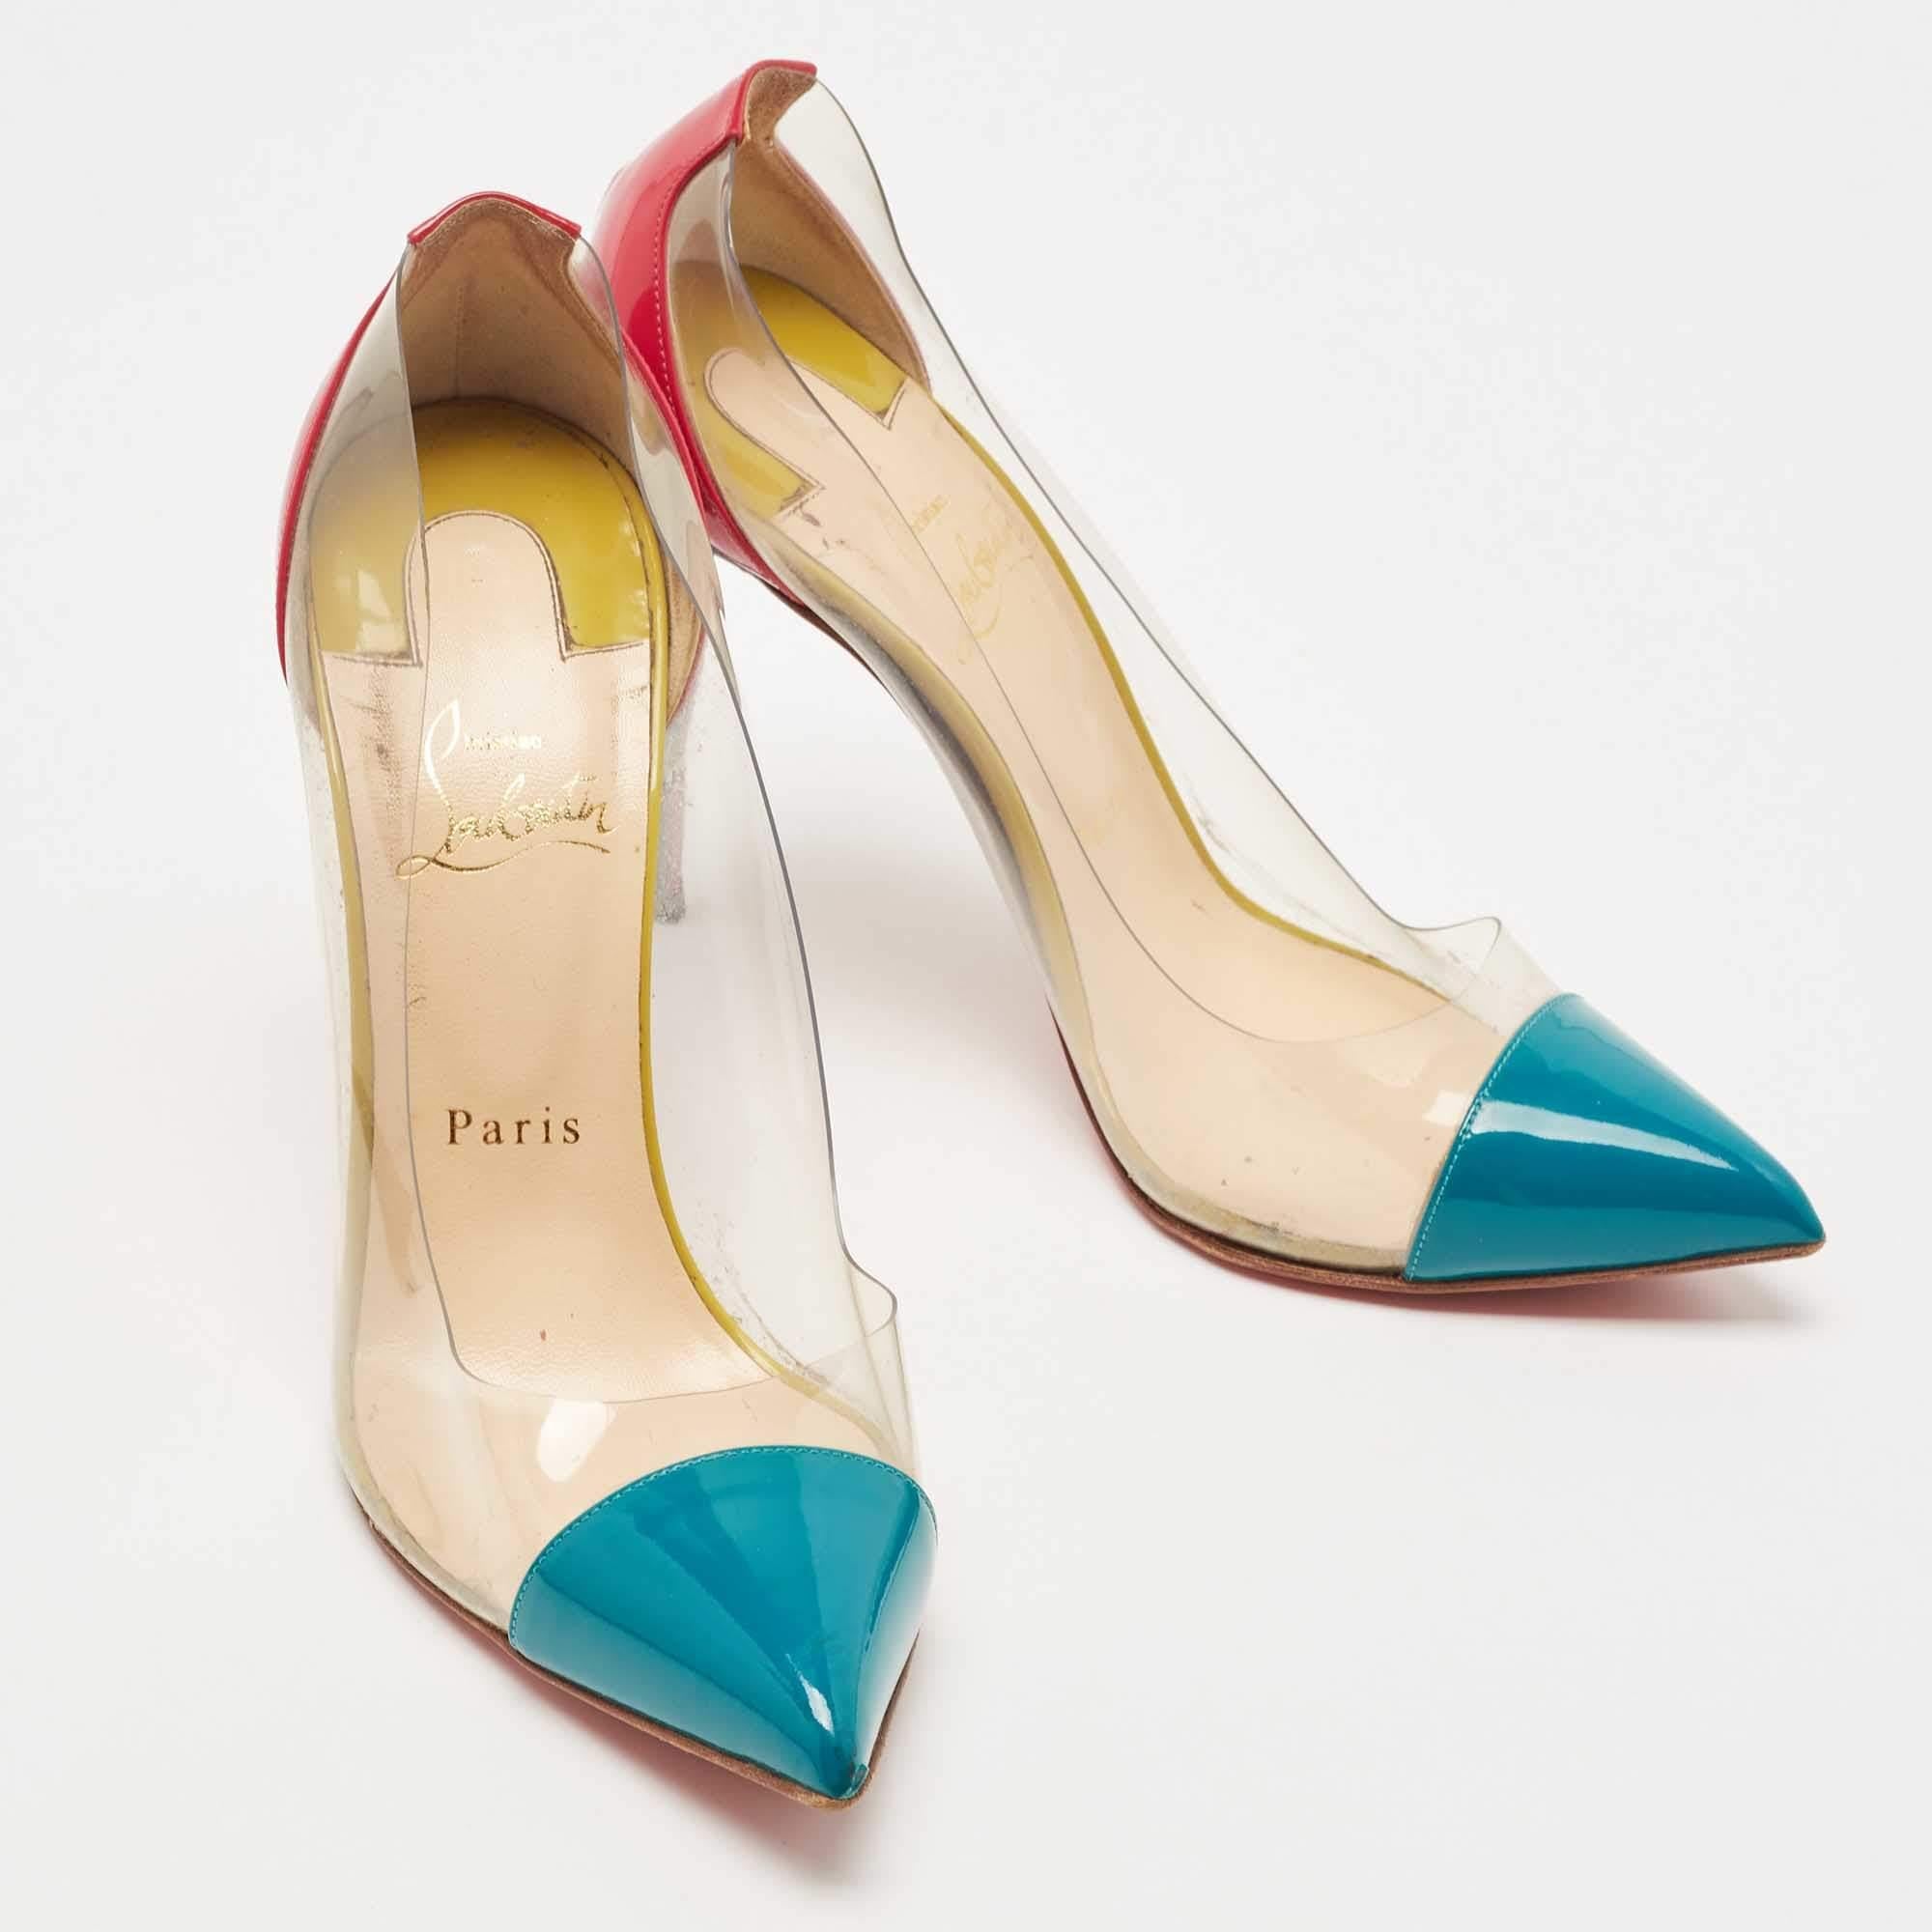 Christian Louboutin's timeless aesthetic and stellar craftsmanship in shoemaking is evident in these stunning Debout pumps. Crafted from black patent leather on the pointed toes and heel counters, they are adorned with iridescent PVC for an